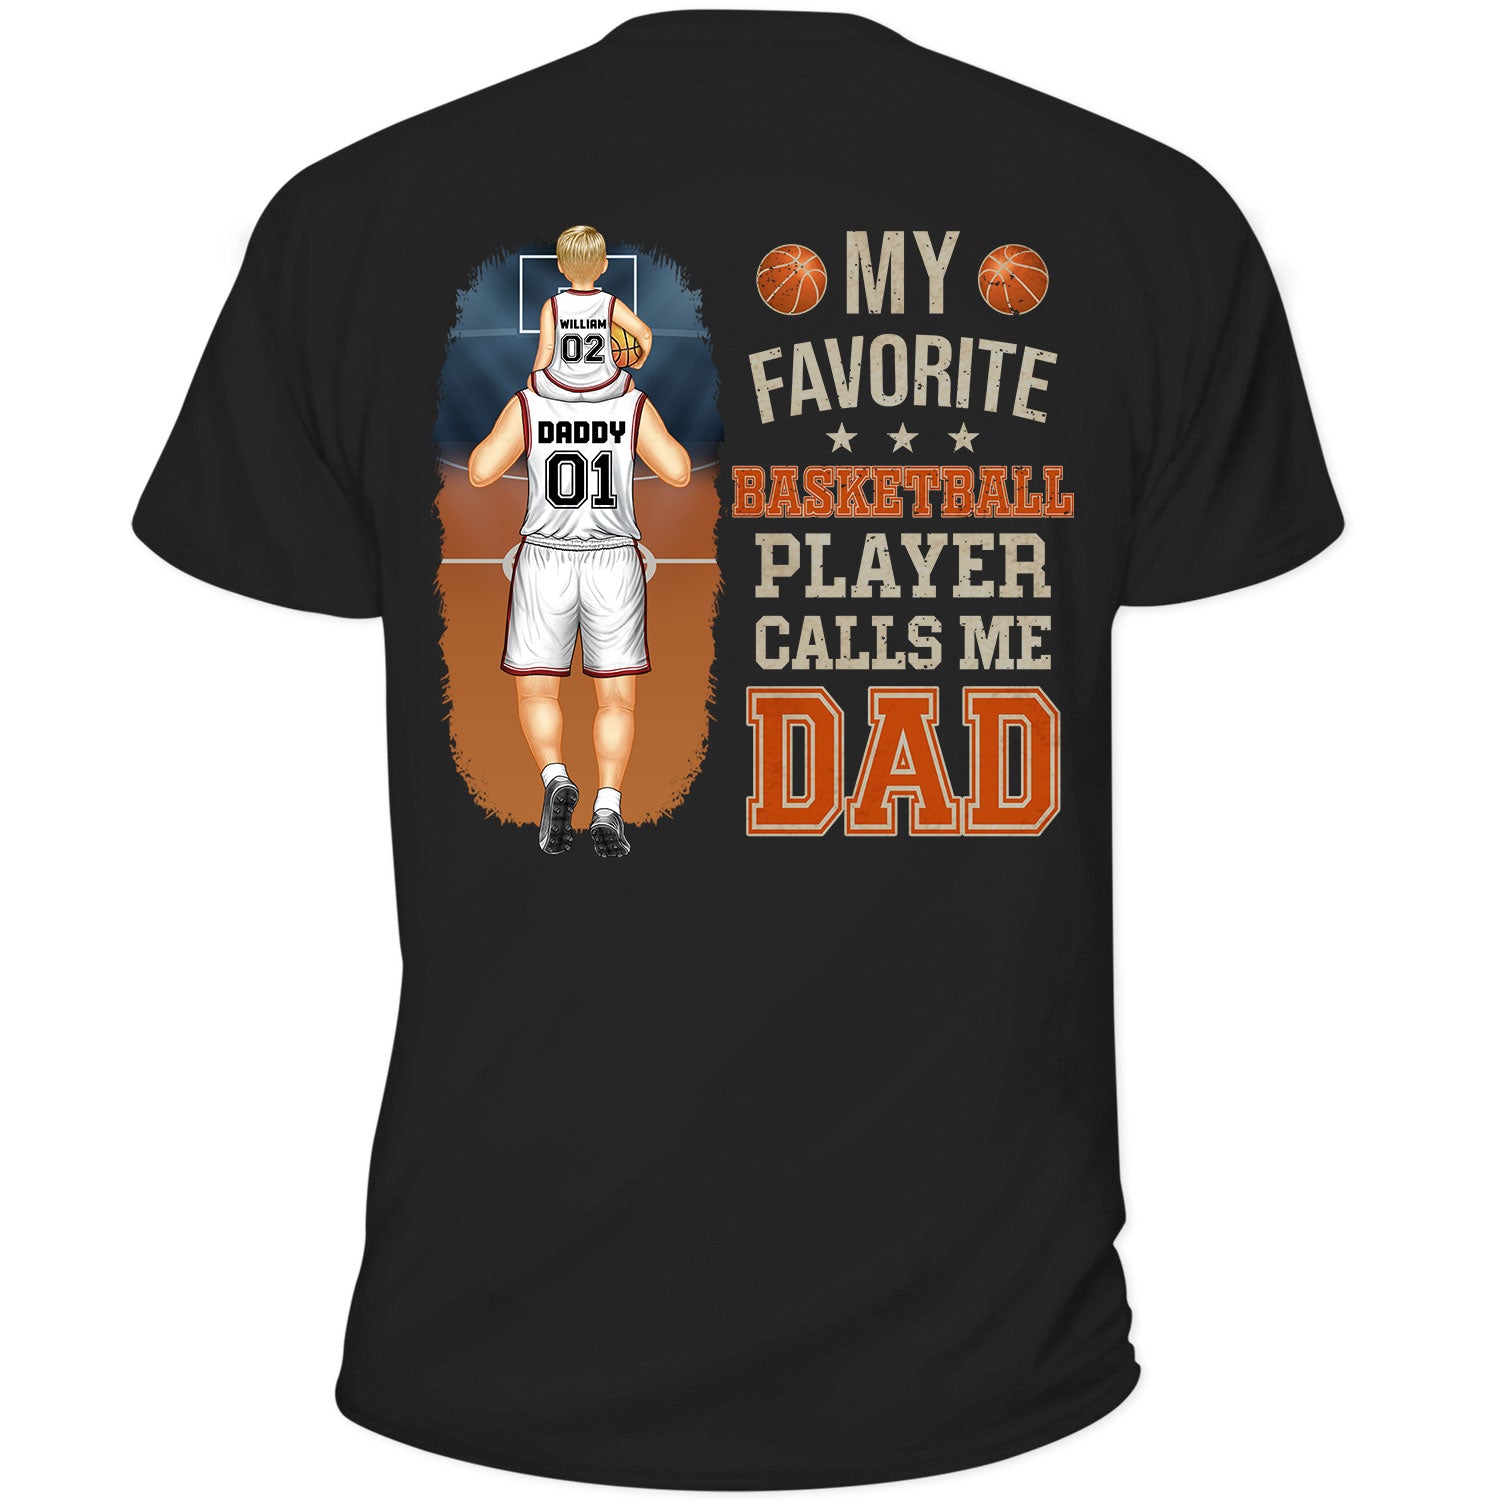 My Favorite Basketball Player Calls Me Dad - Gift For Father, Sport Fans - Personalized T Shirt